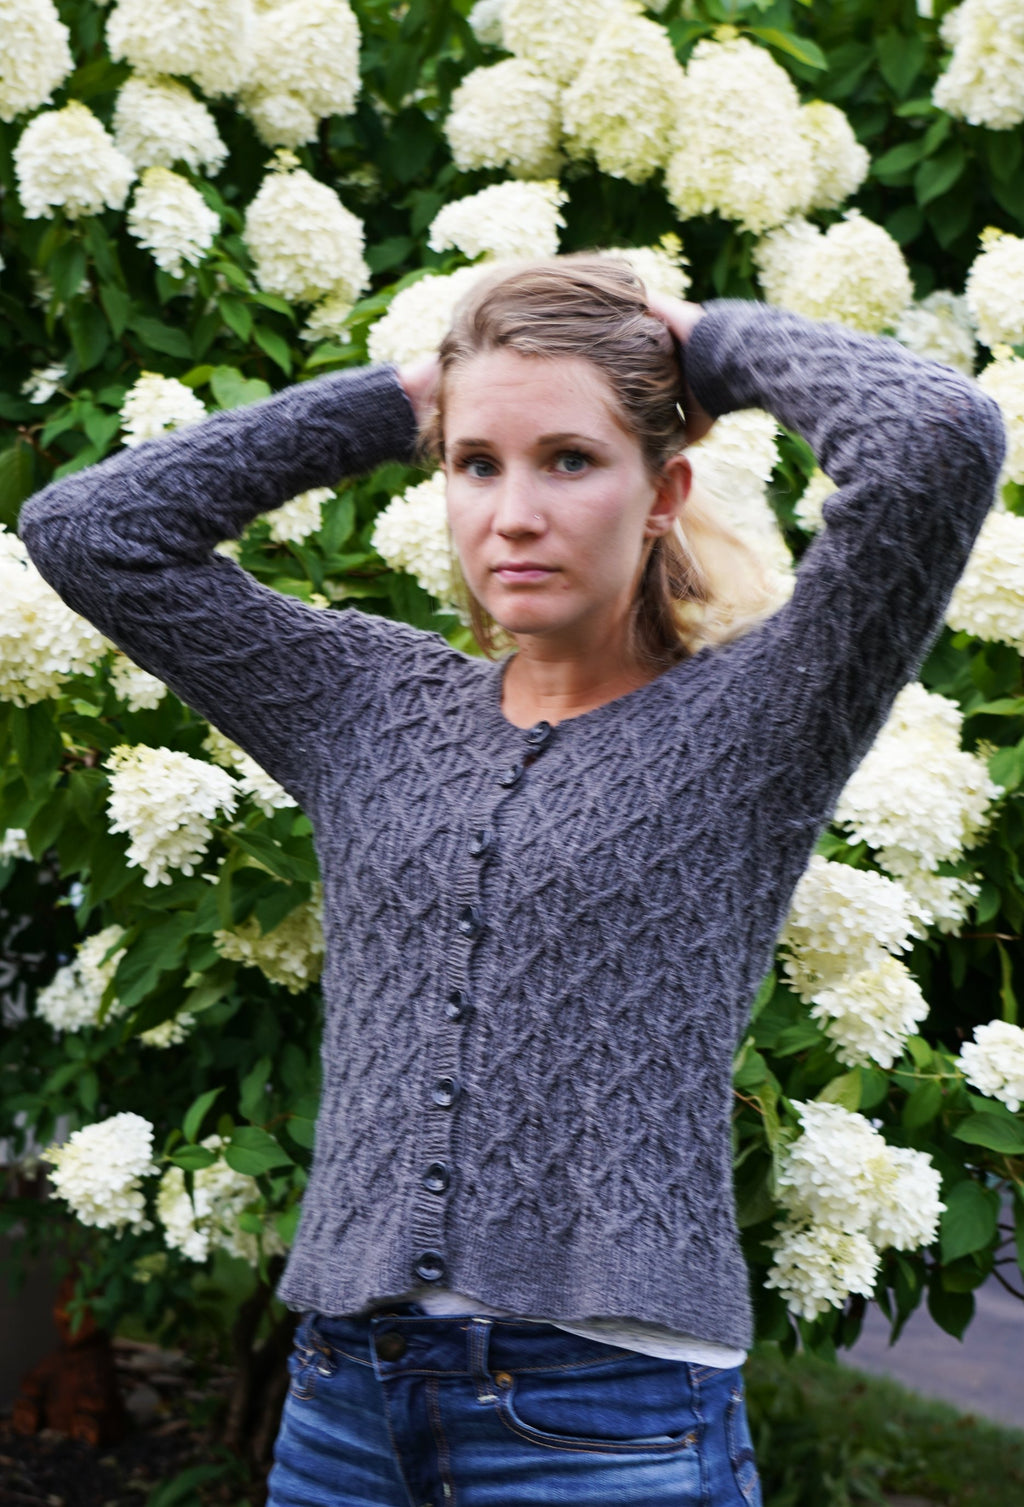 Thatched Country Cardigan - Designed by Vanessa Ewin